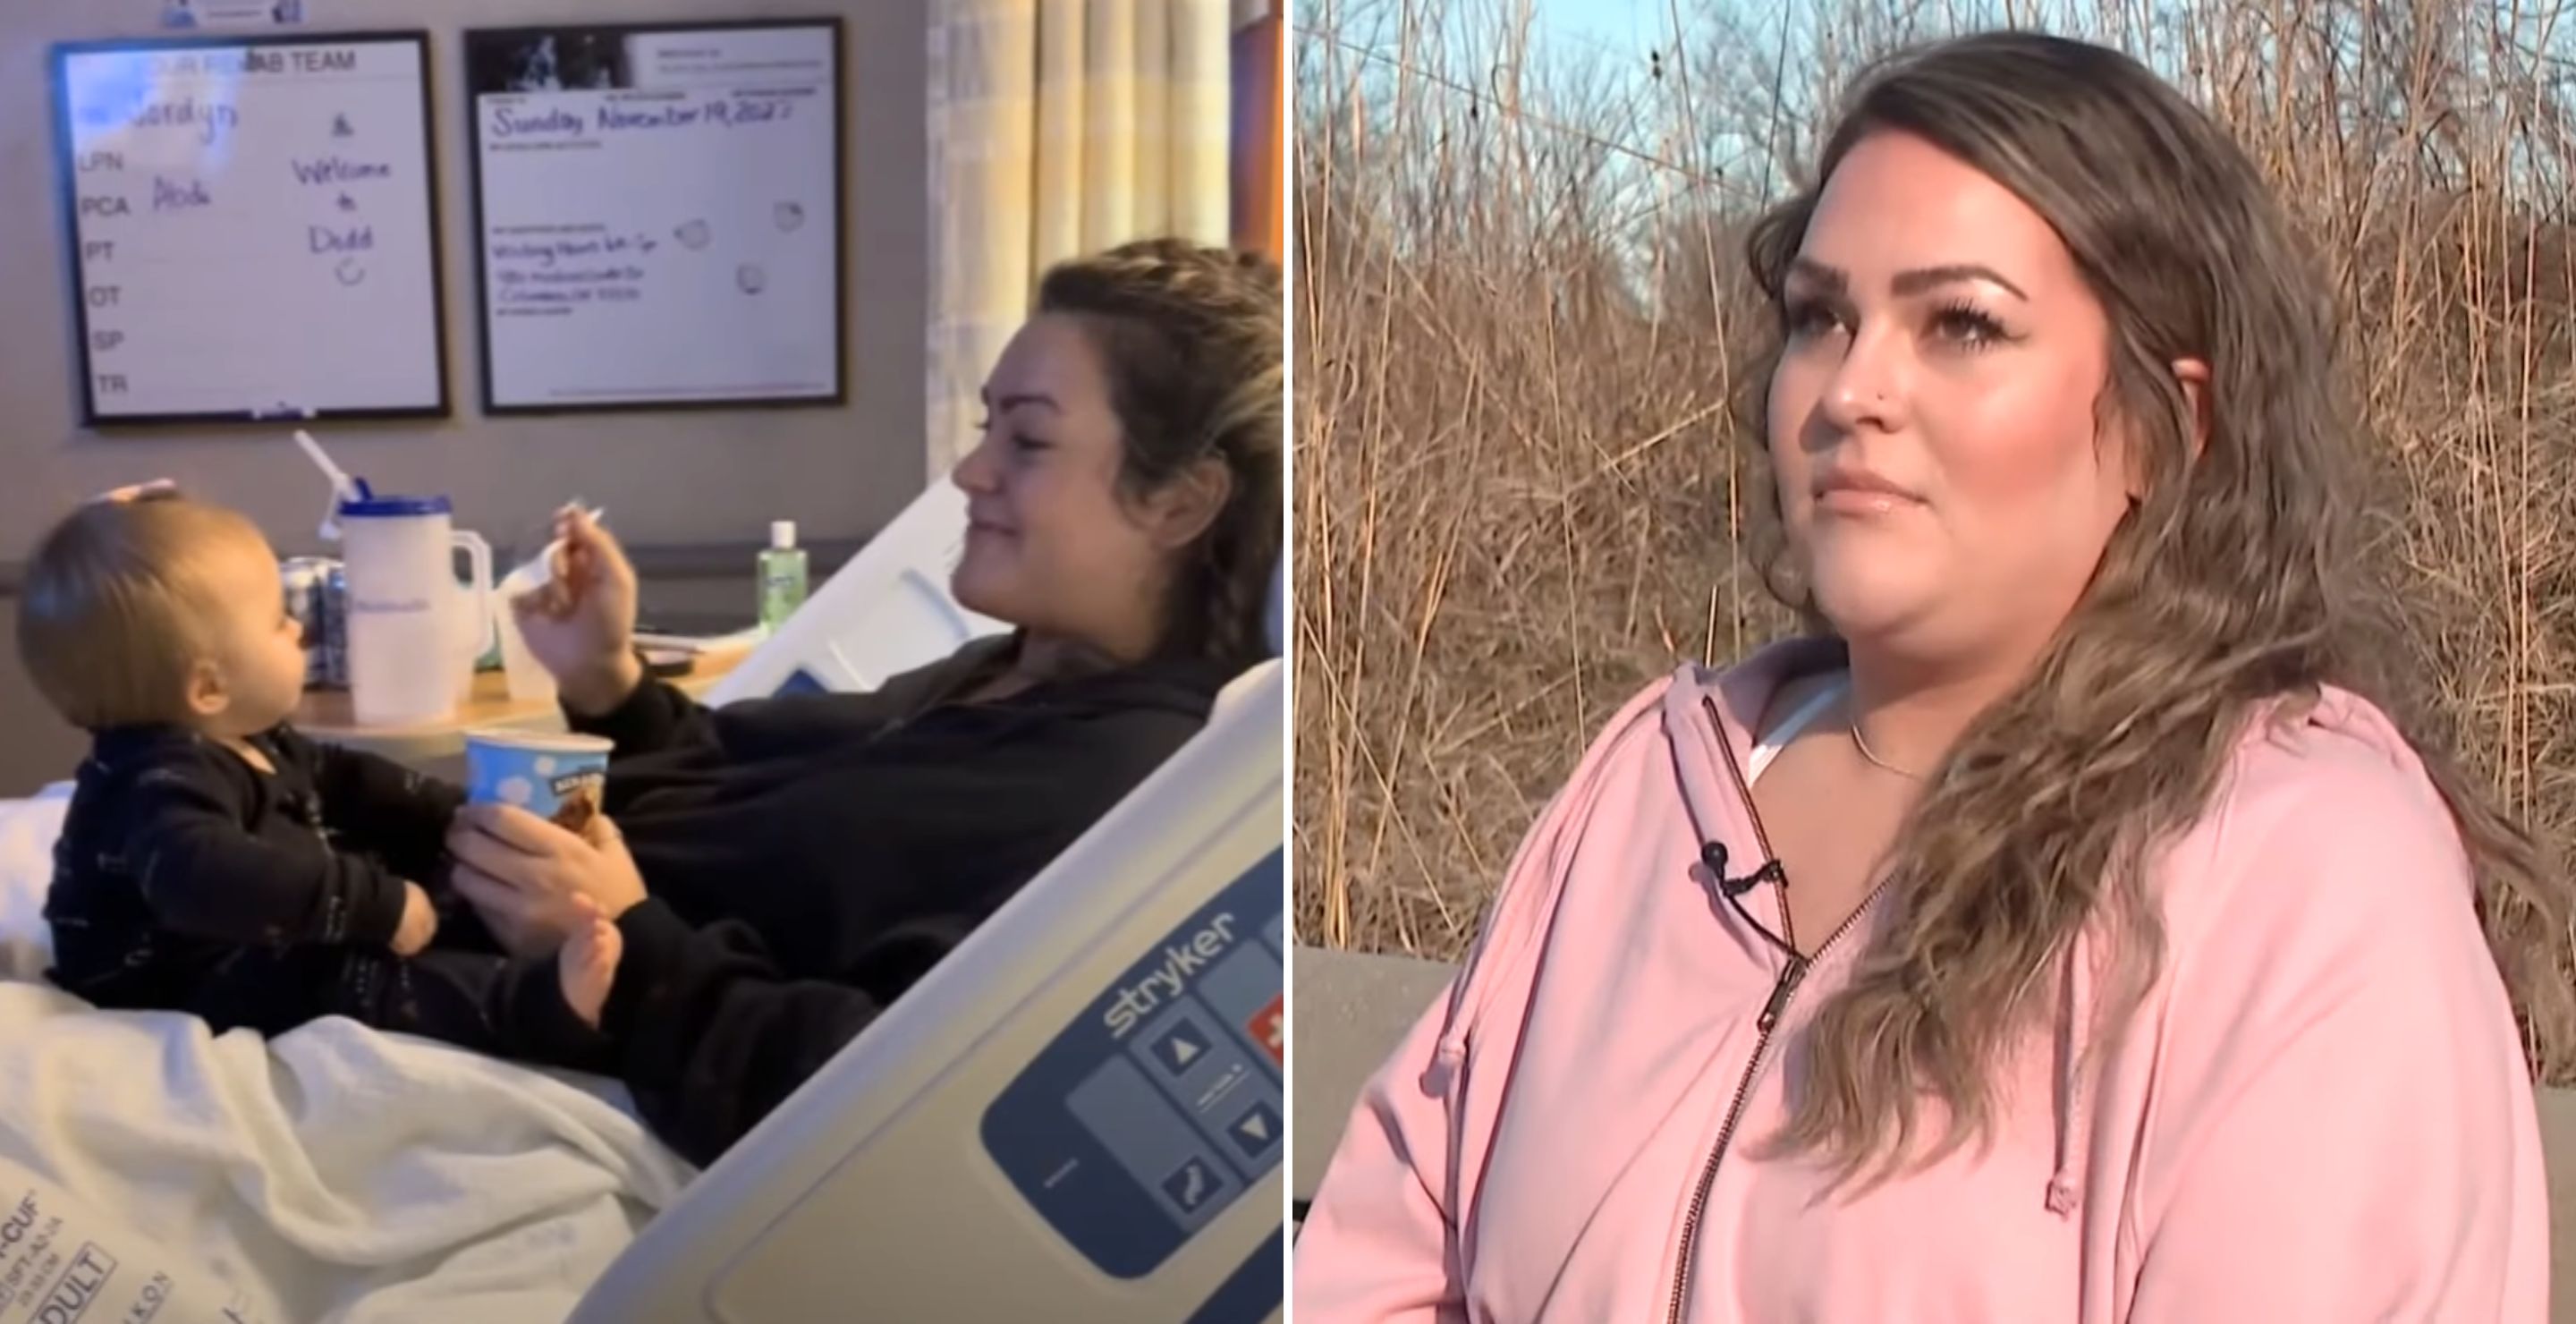 Ohio Mother Makes A Miraculous Recovery After A Near-Fatal Hunting Accident